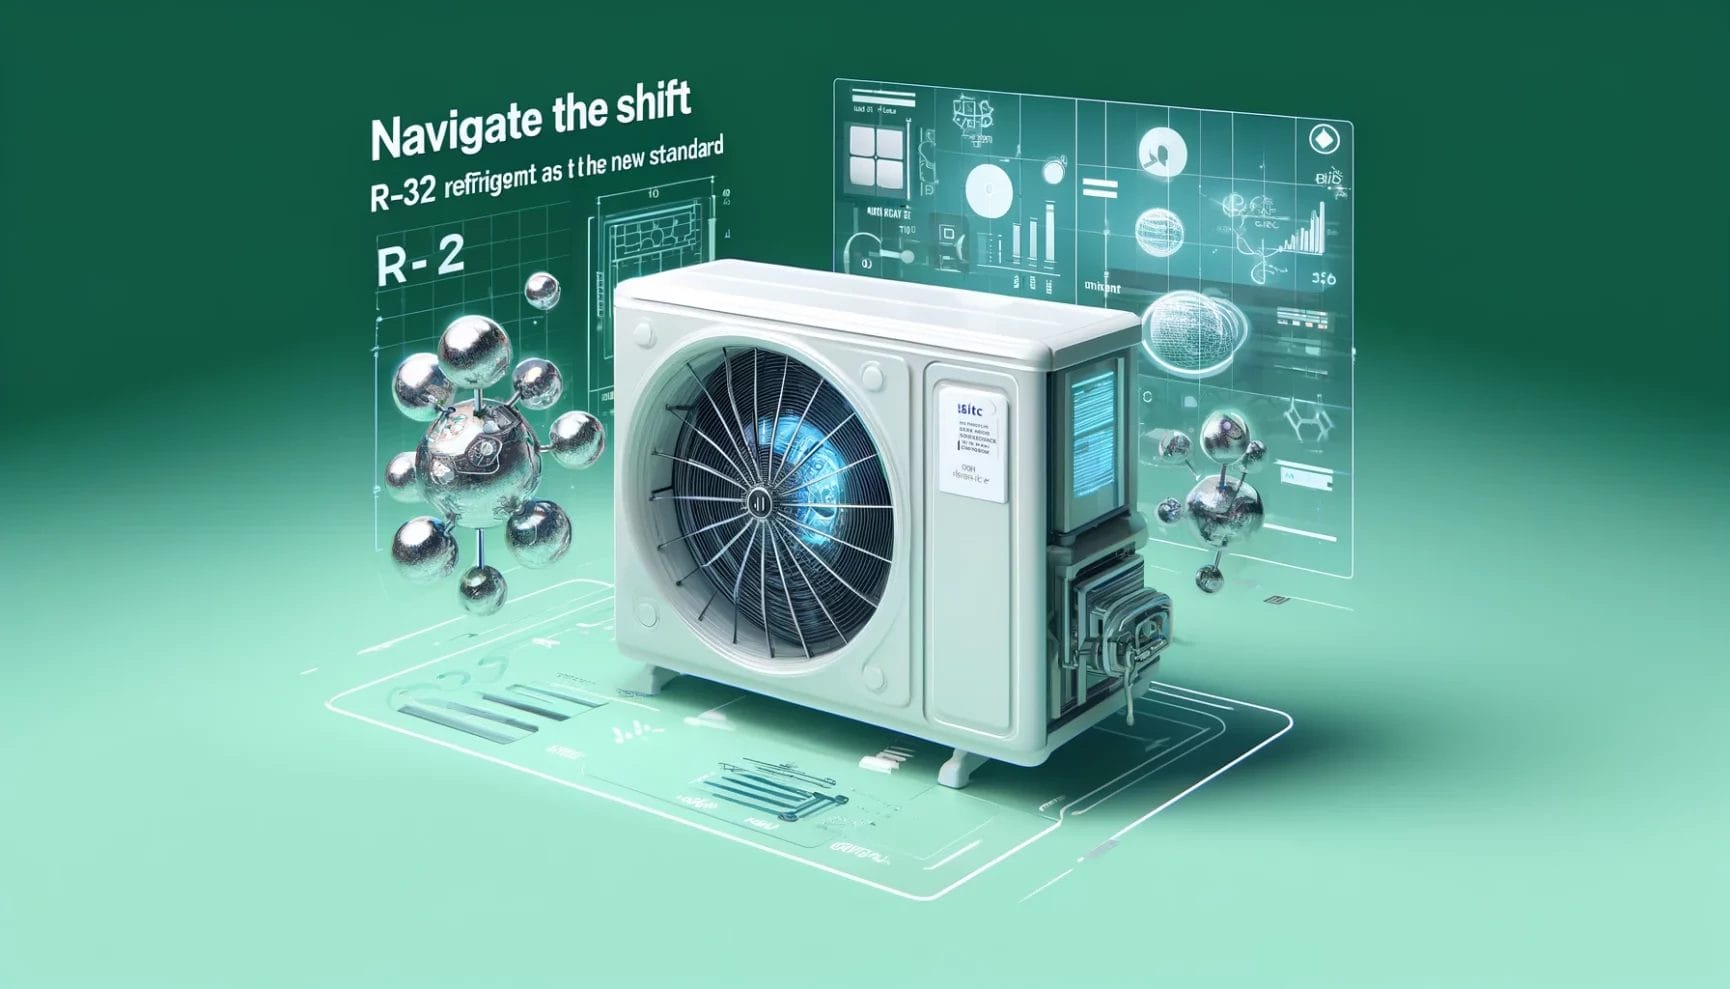 Air conditioner unit with holographic display showcasing r-32 refrigerant technology on a green background.